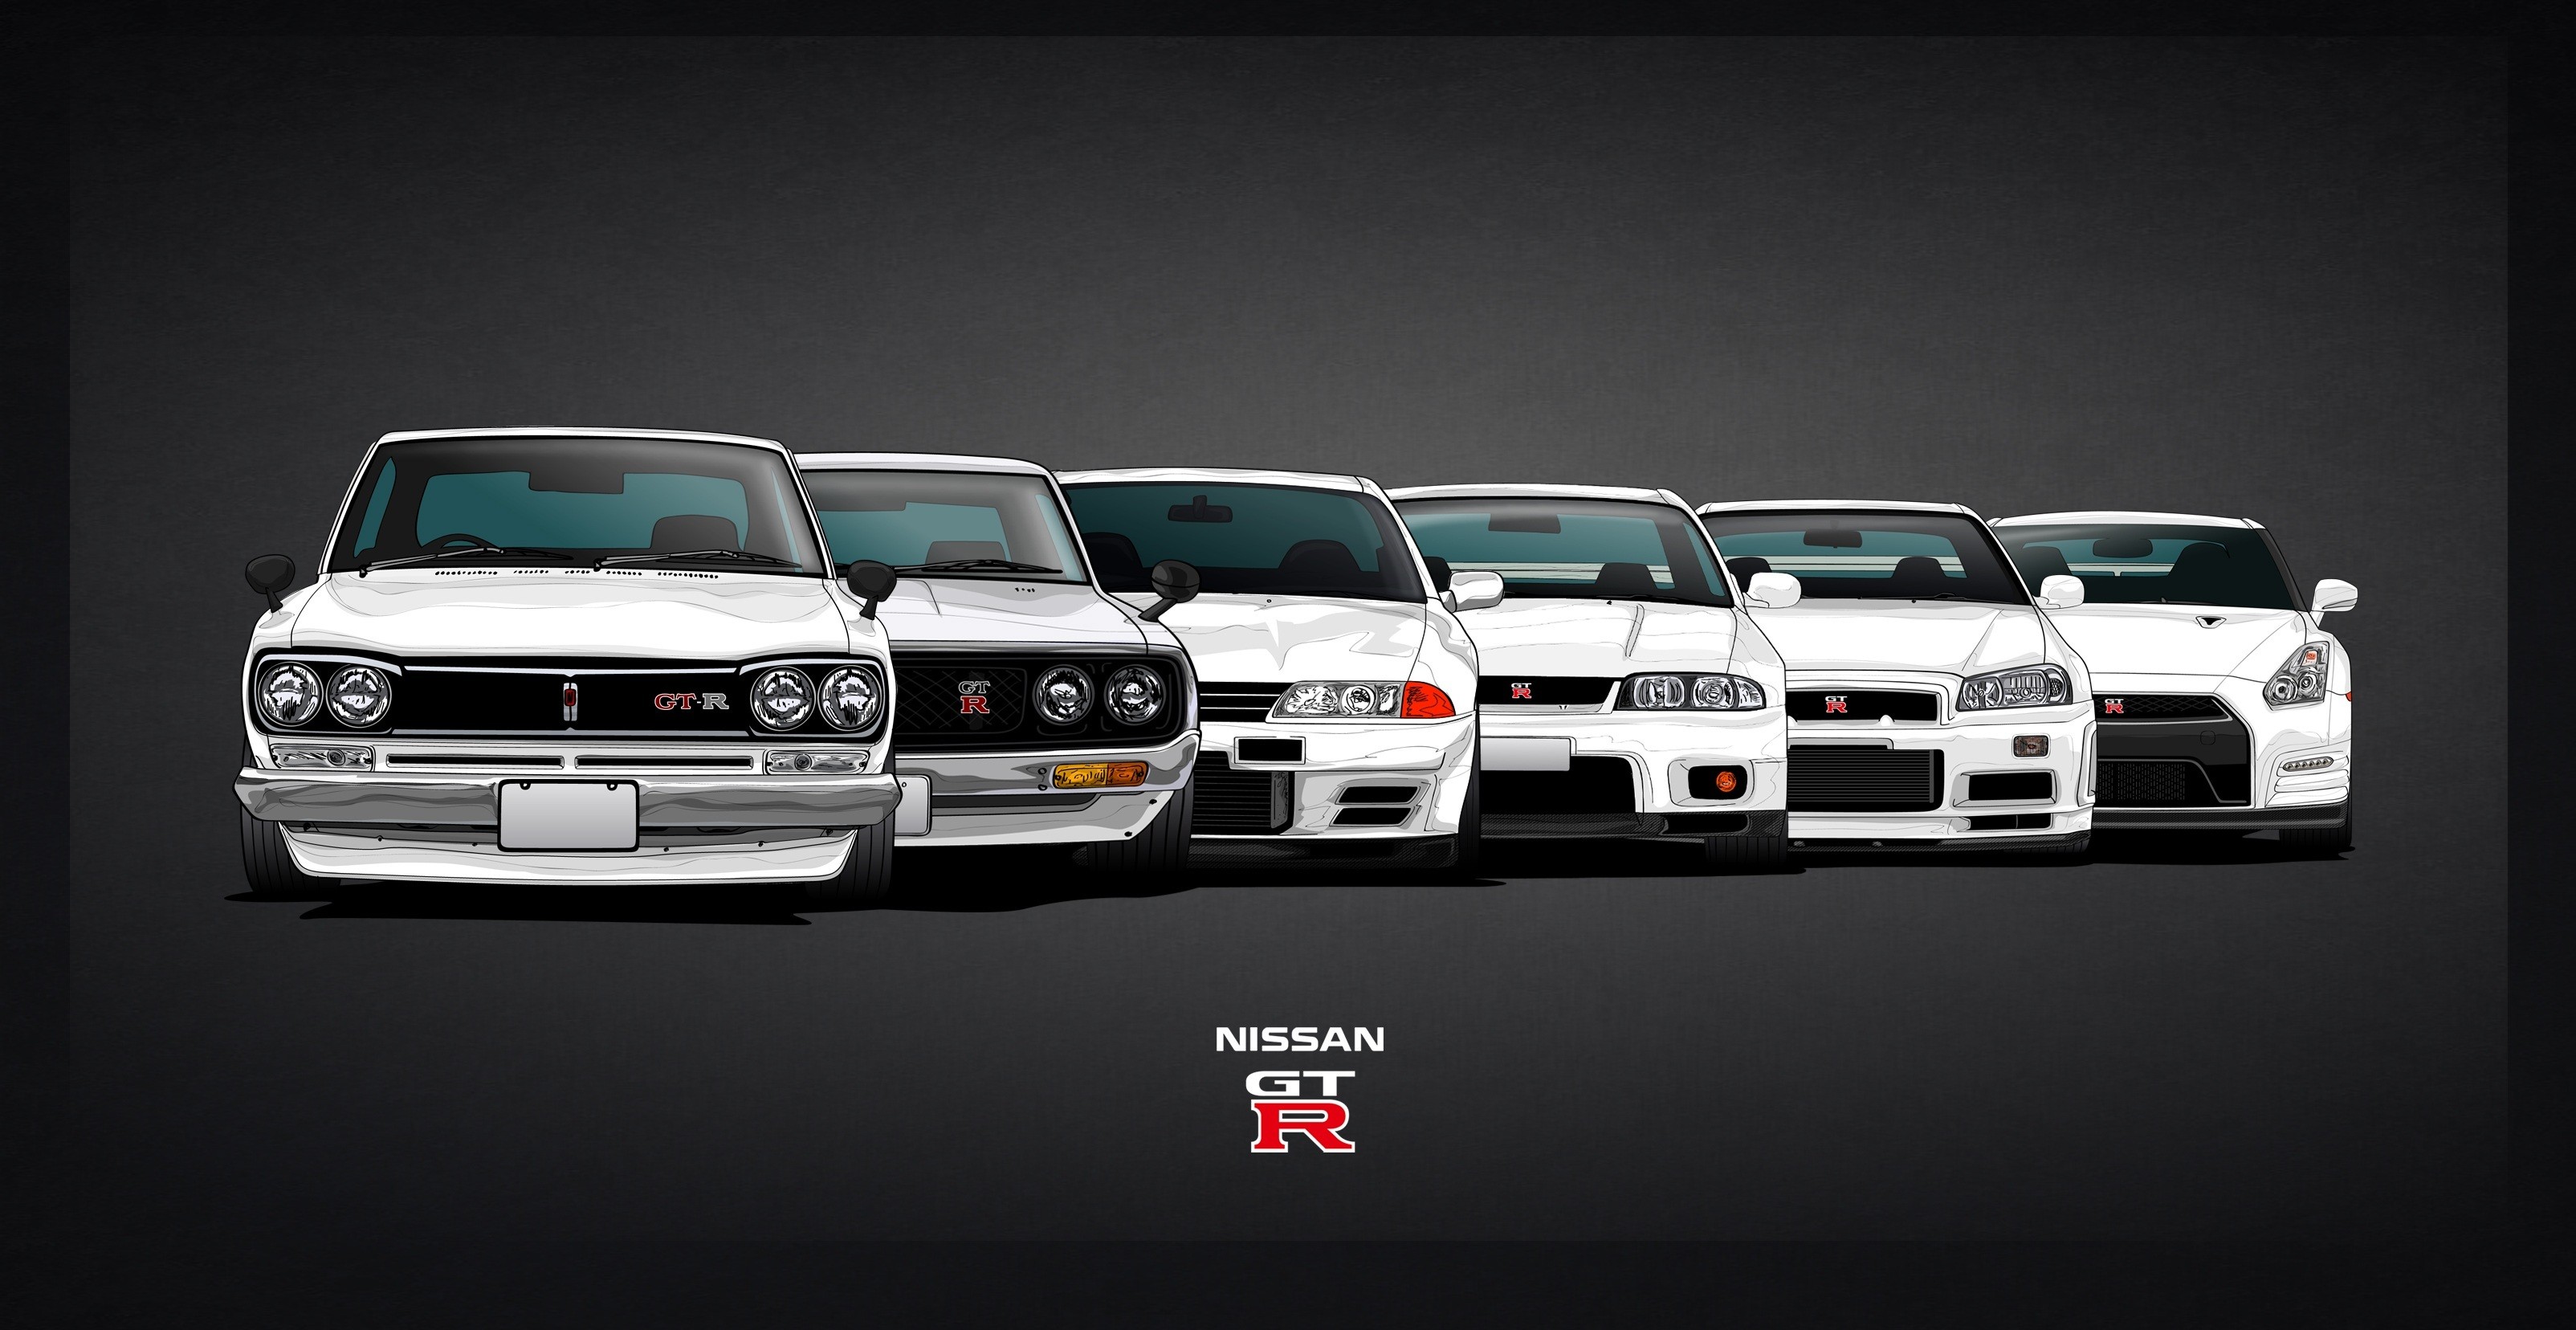 General 3208x1656 car vehicle Nissan white cars frontal view Nissan Skyline C10 Nissan Skyline C110 Nissan Skyline R32 Nissan Skyline R33 Nissan Skyline R34 Nissan GT-R simple background gray background sports car supercars artwork